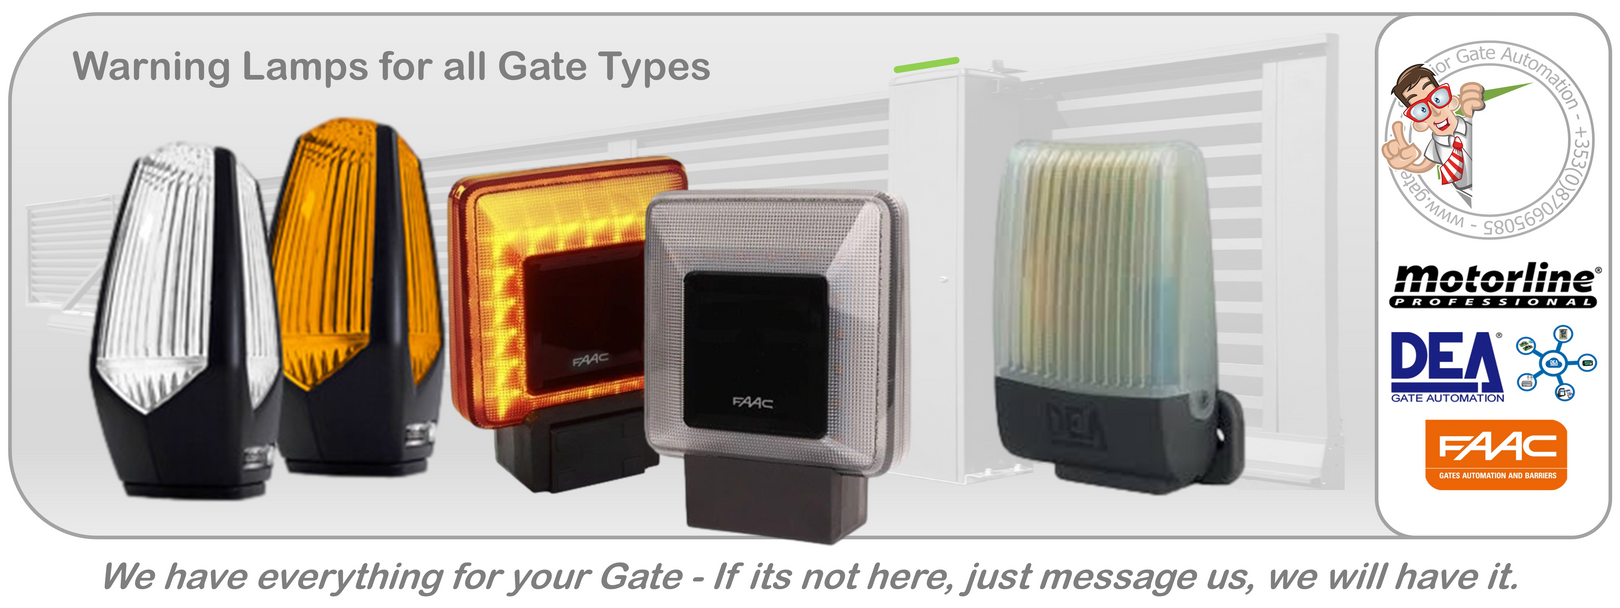 Warning Lamps for all Gate Types